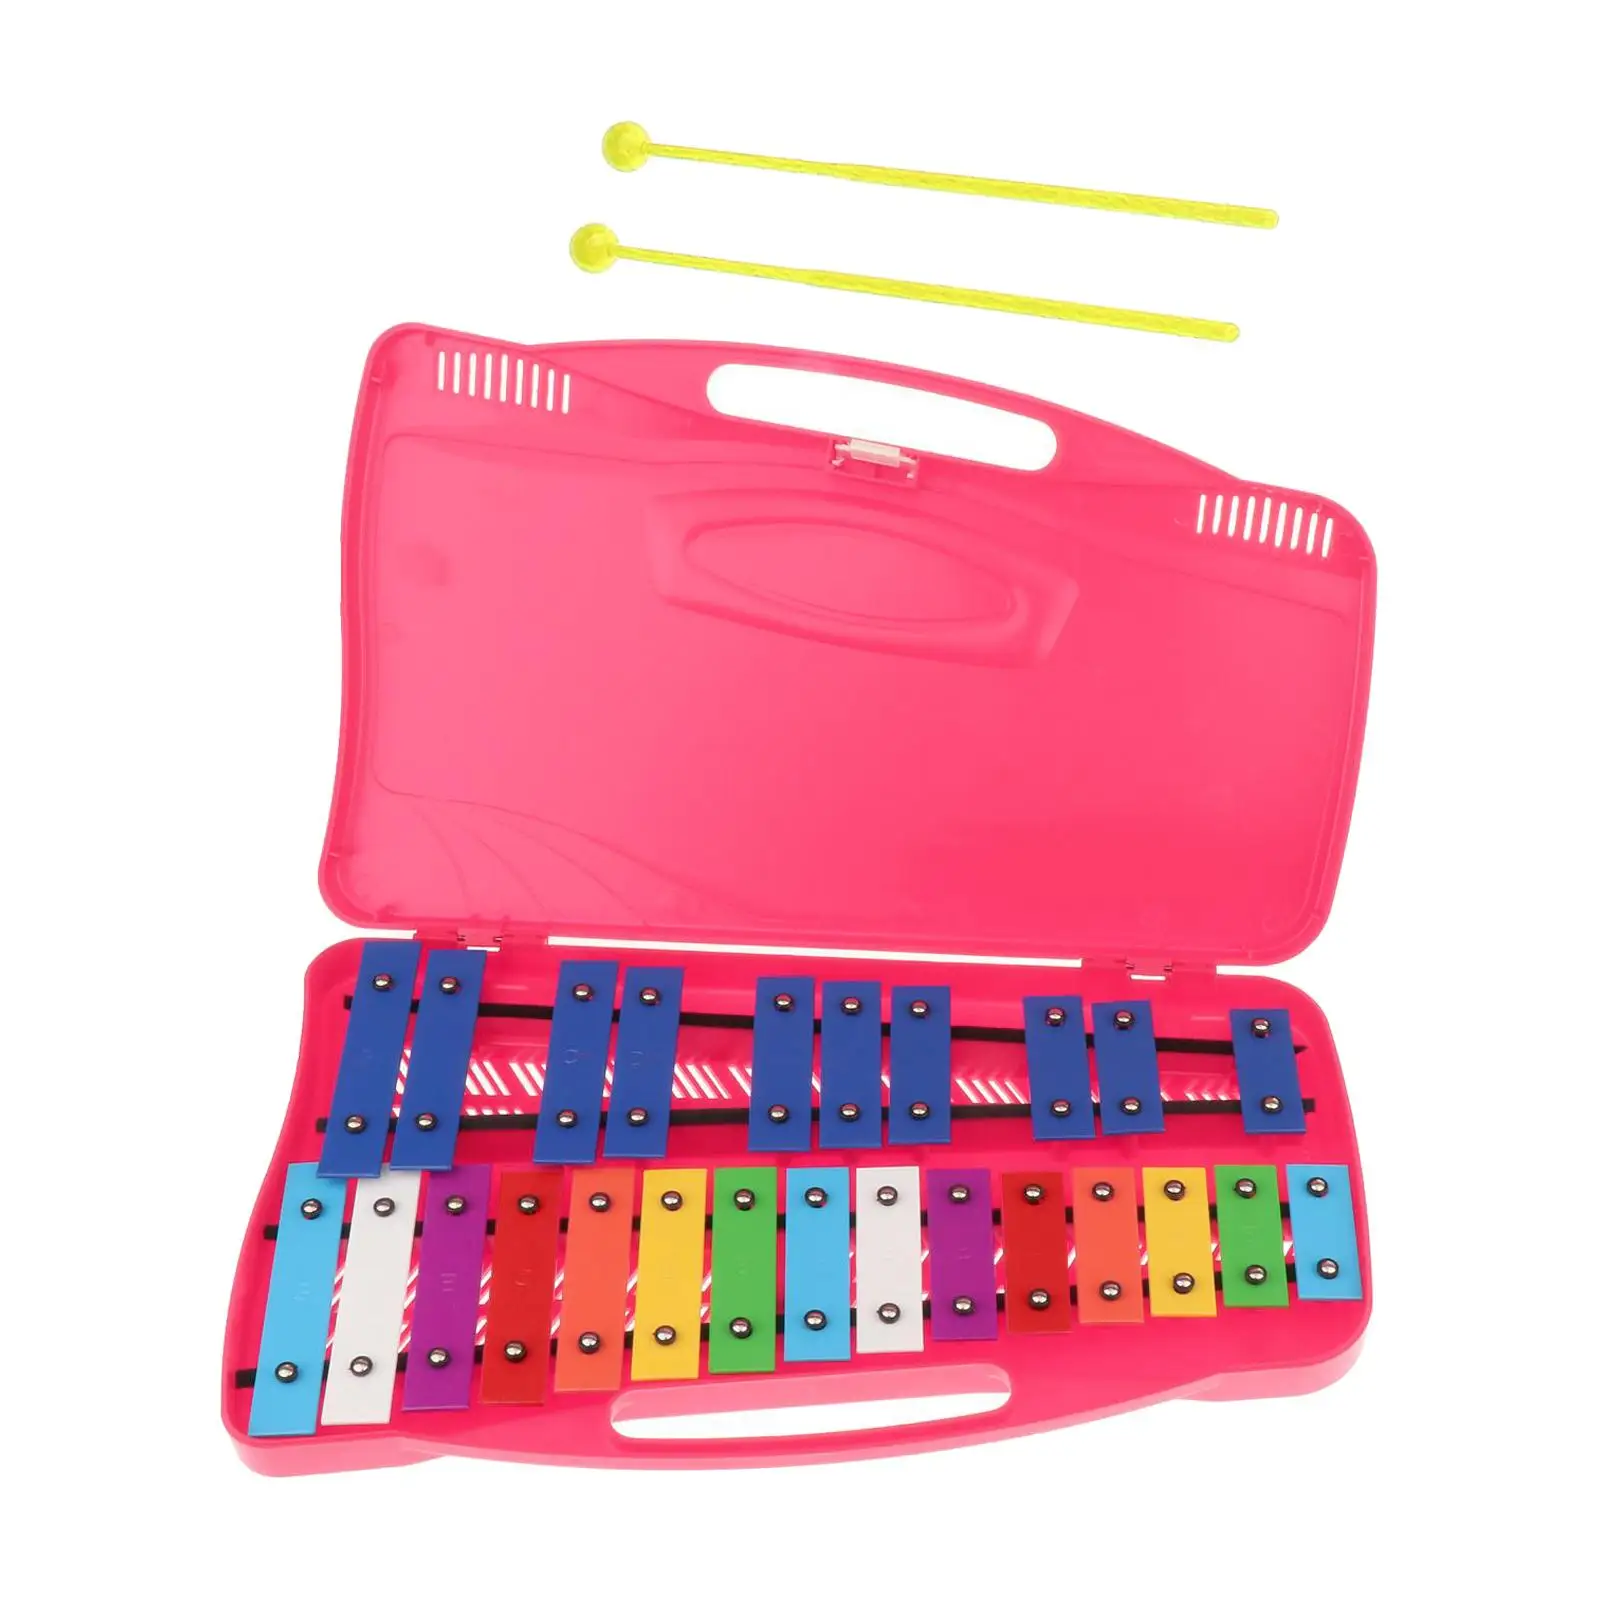 Professional 25 Note Xylophone Perfectly Tuned Glockenspiel with Case for Kids Beginners Children Adult Percussion Instruments